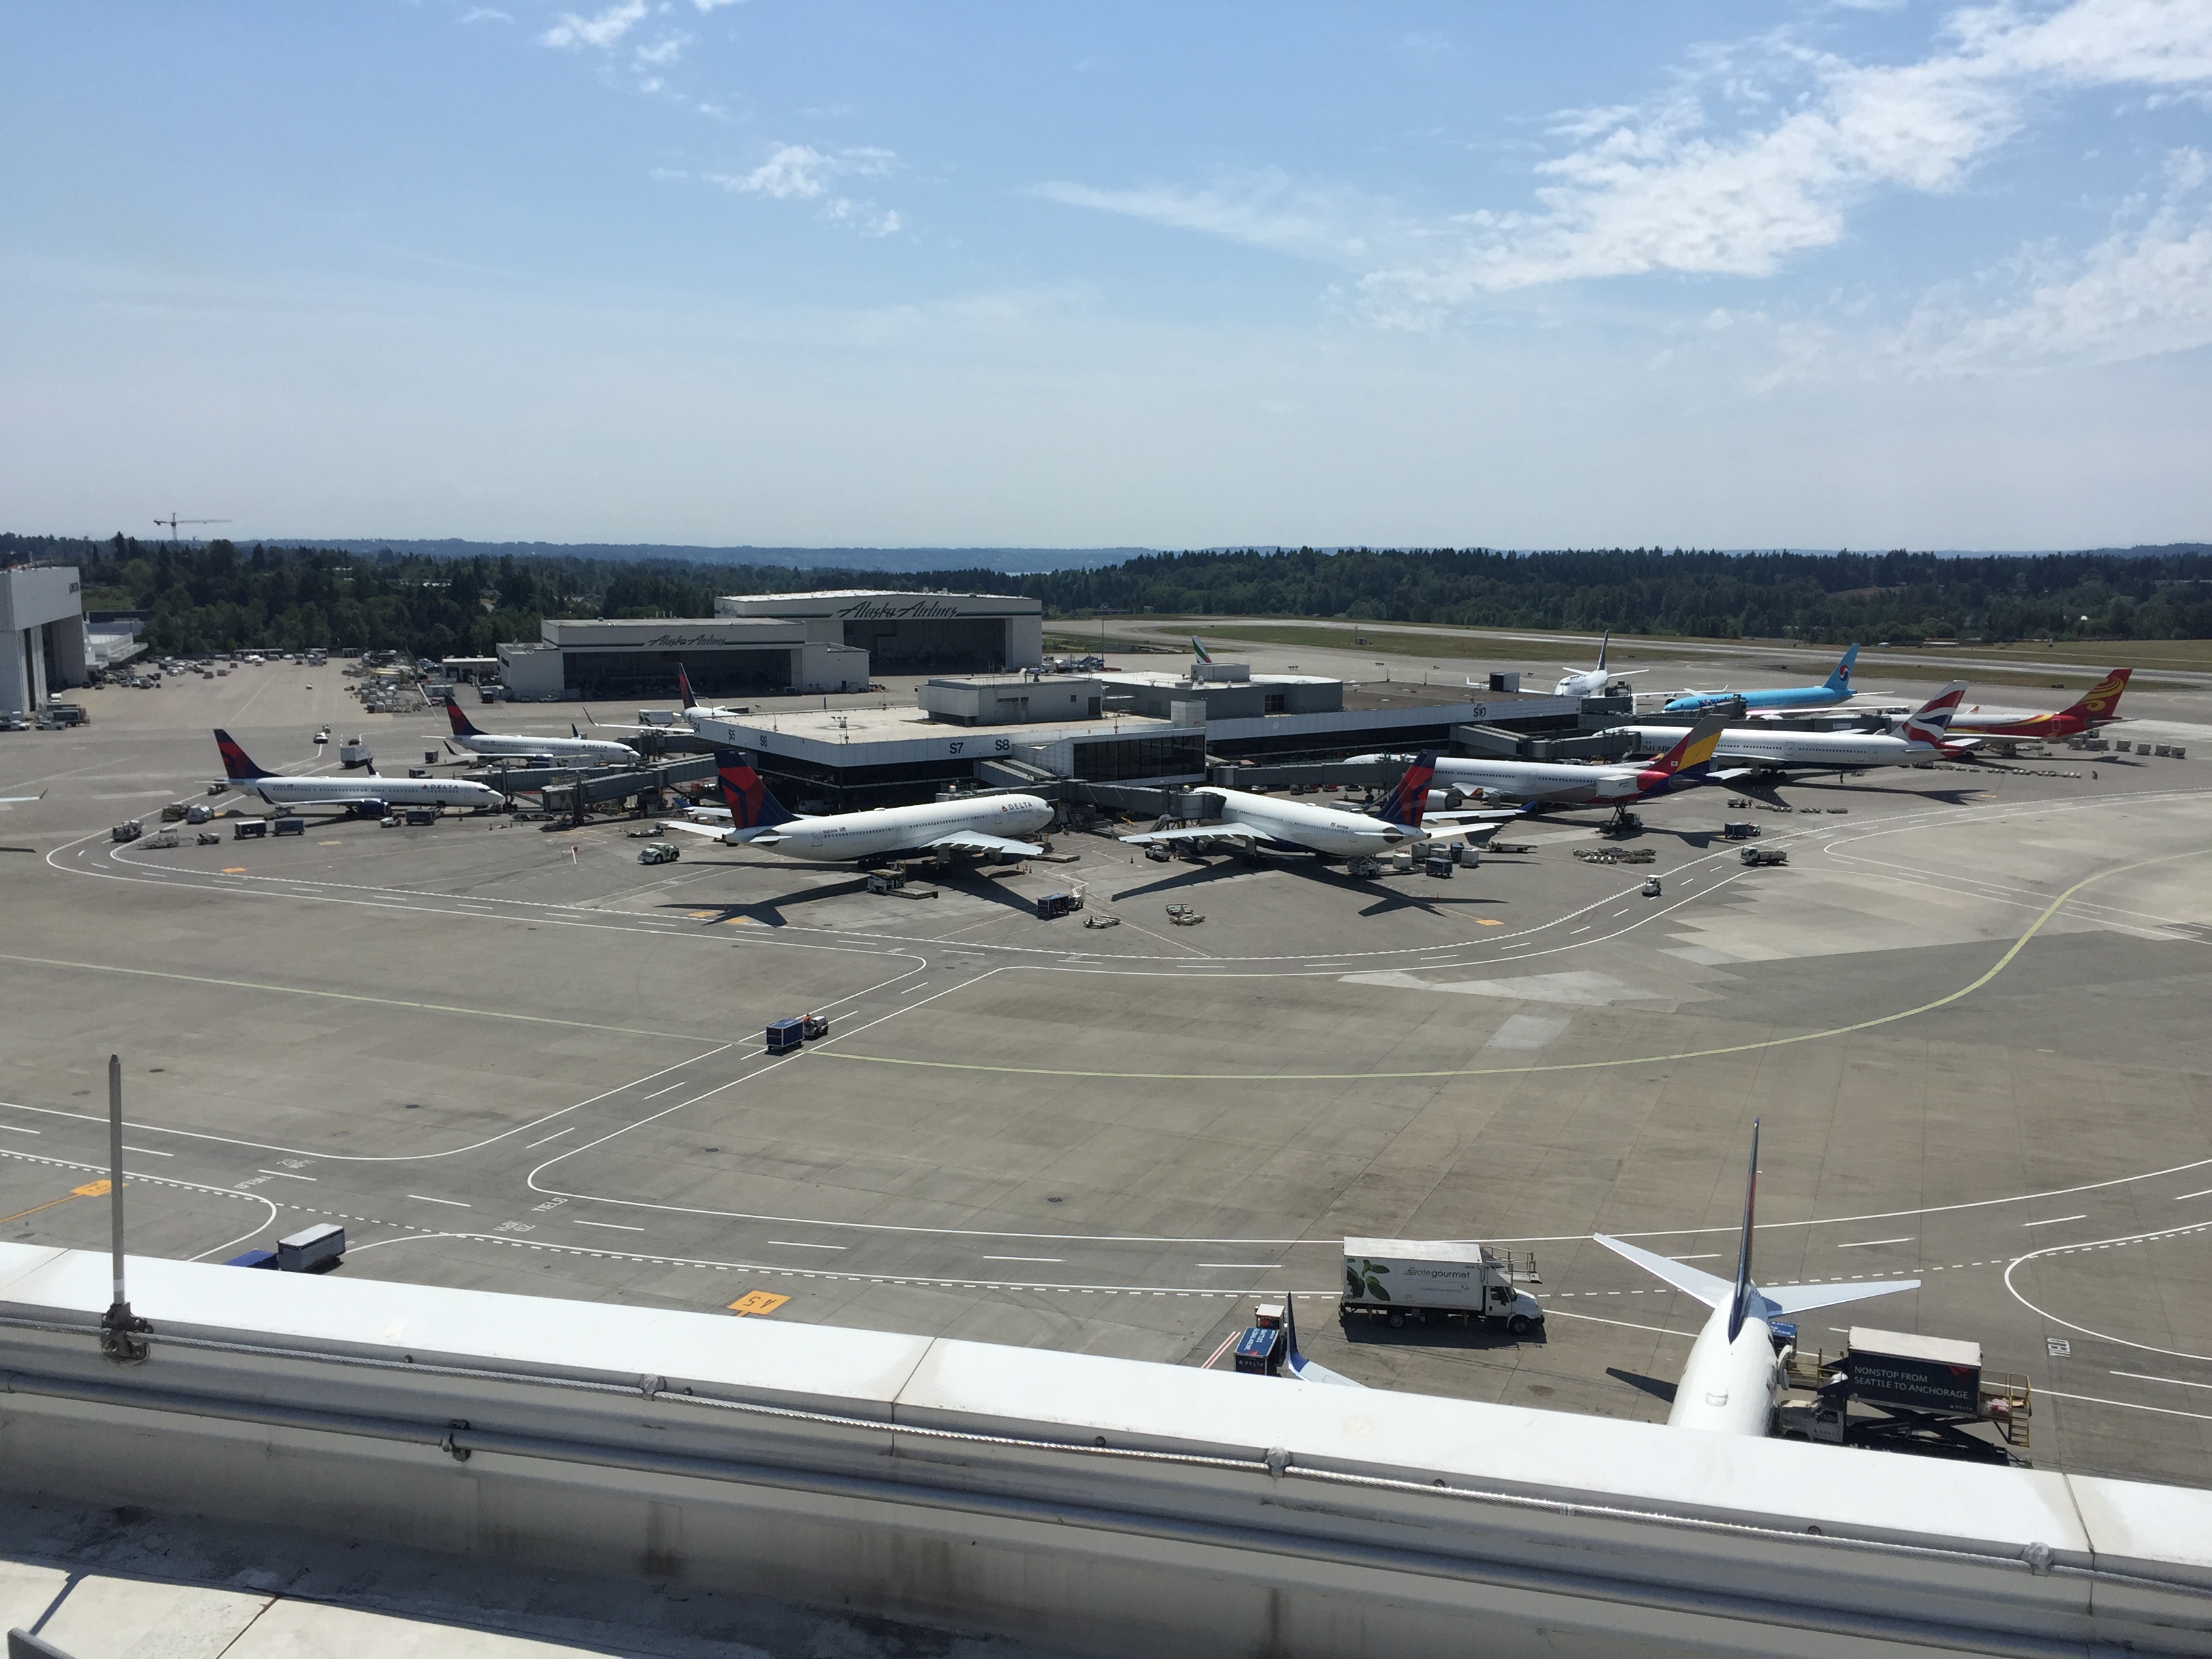 Port of Seattle at Seattle-Tacoma International Airport | My Life @ Riddle